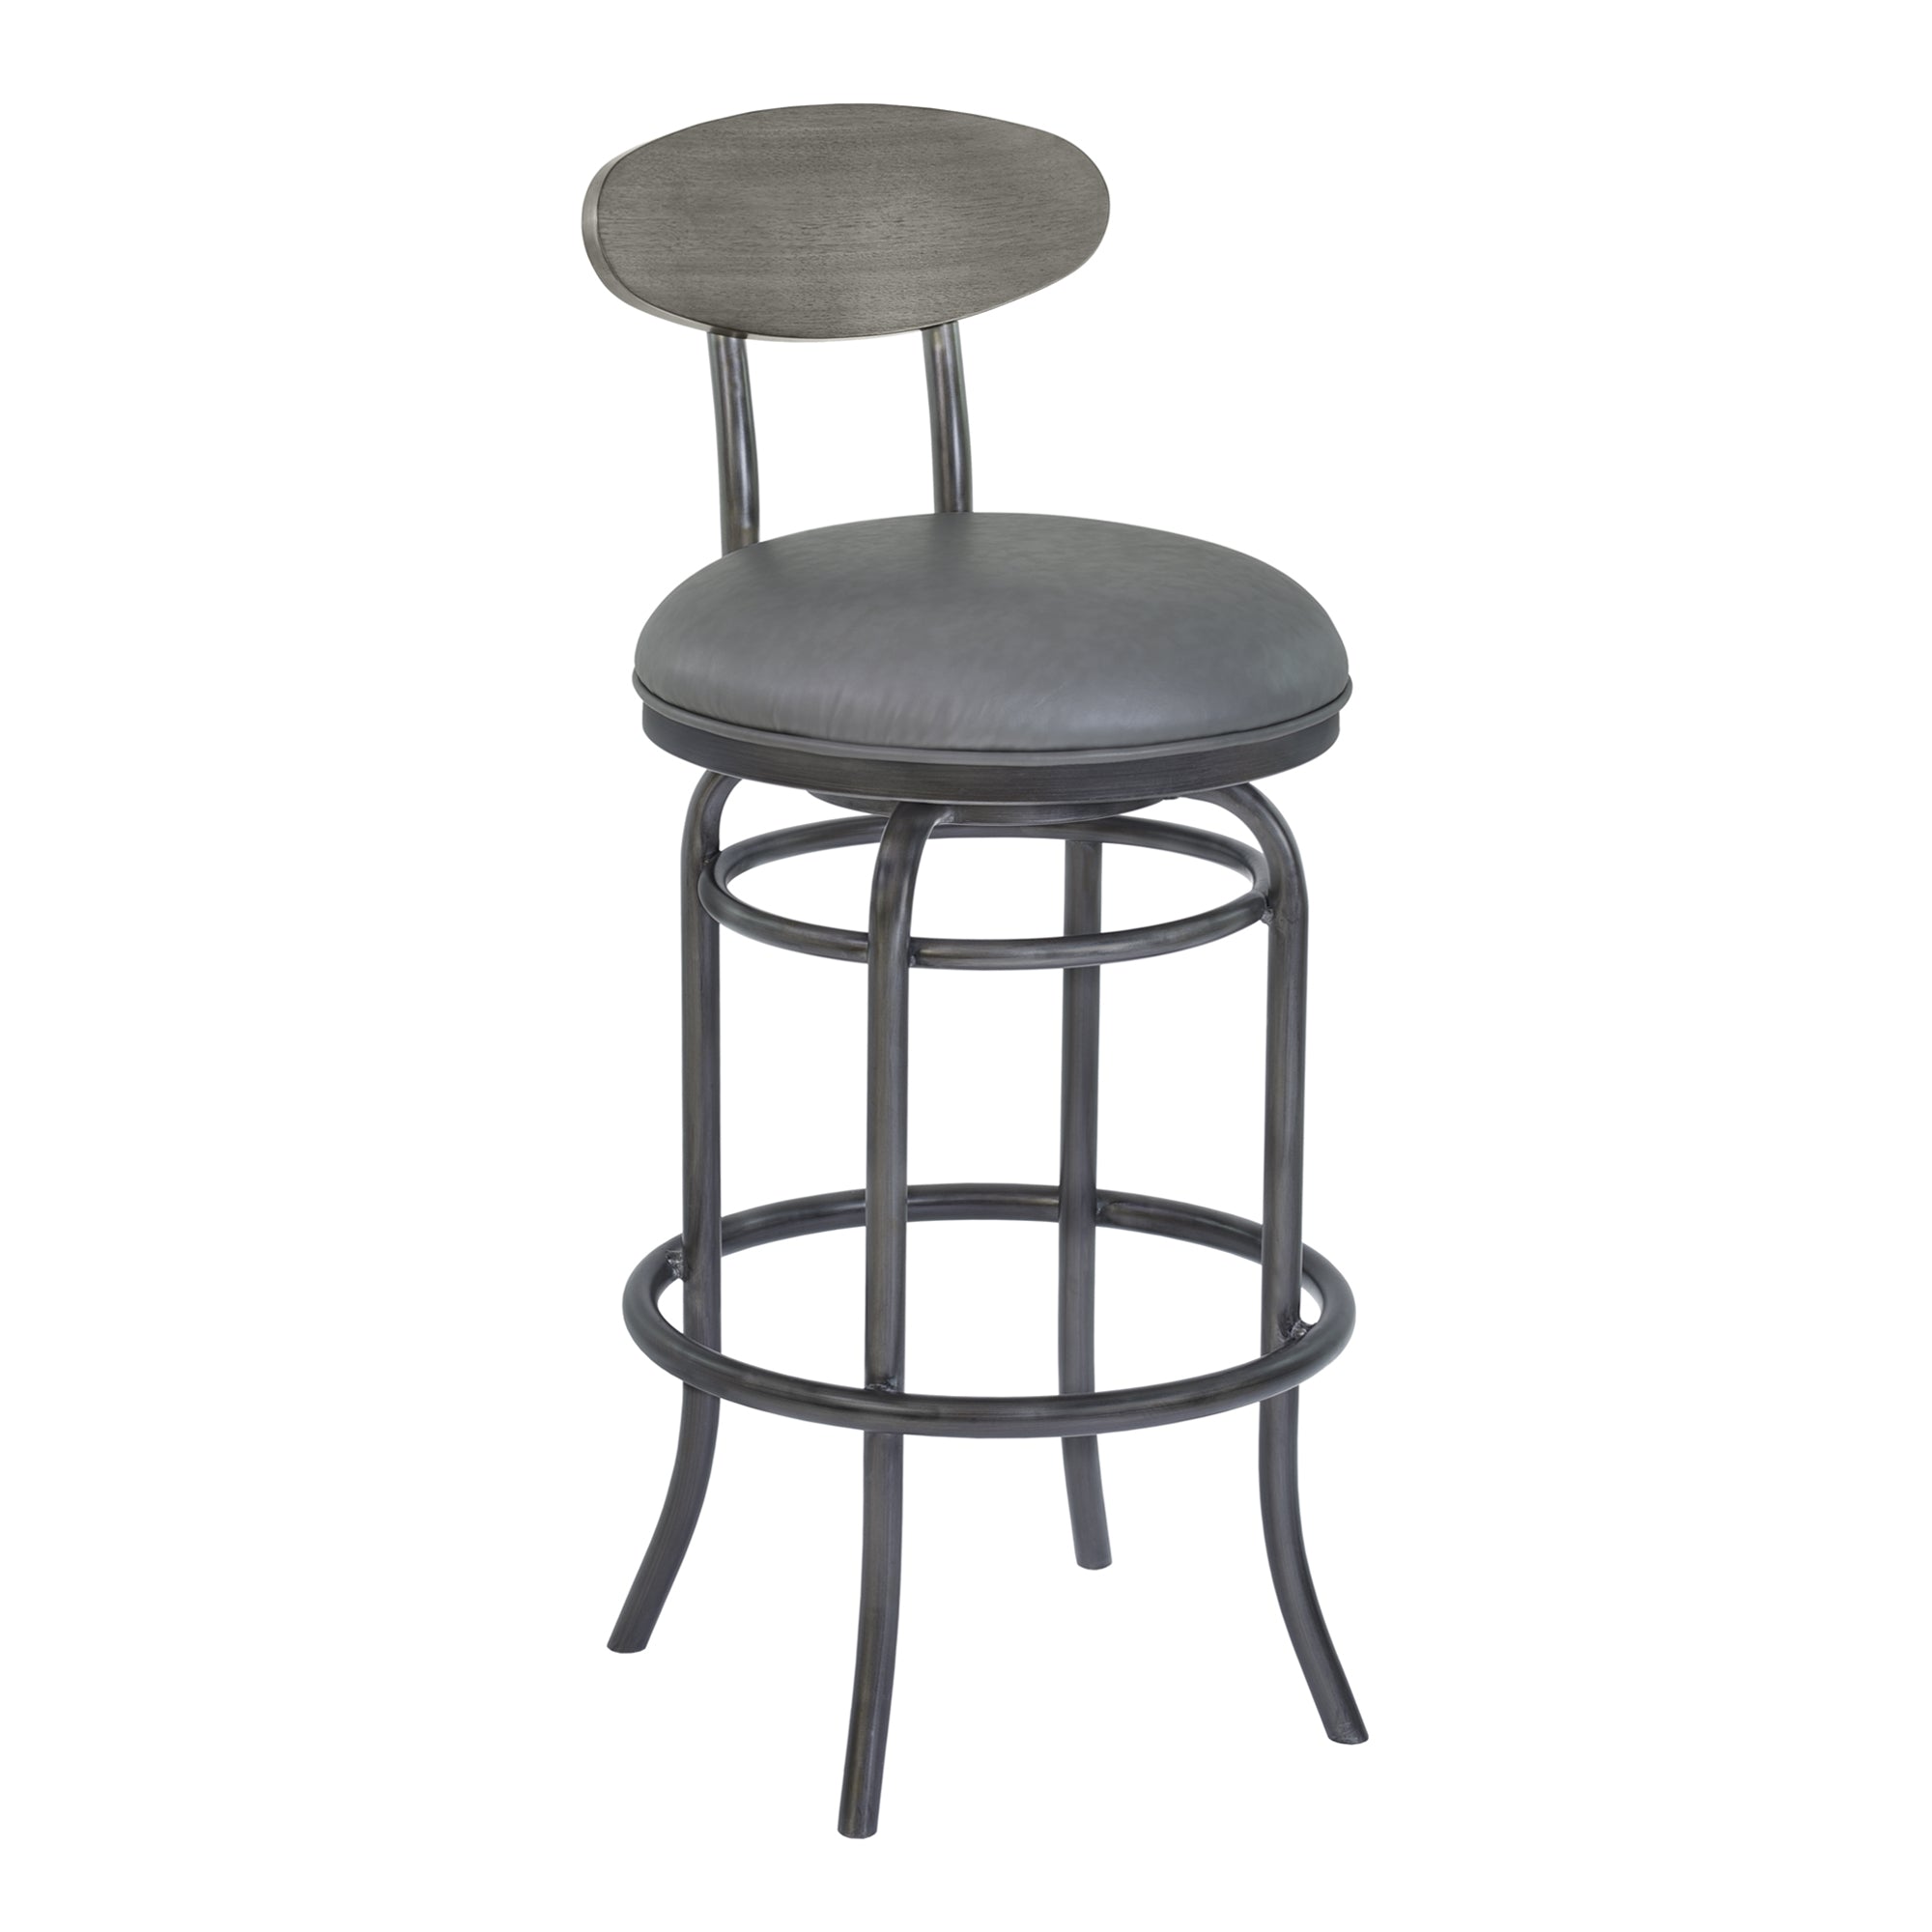 Armen Living LCDABAMFVG30 Davis 30 Bar Height Metal Swivel Barstool in Vintage Gray Faux Leather with Mineral Finish and Gray Walnut Wood Back